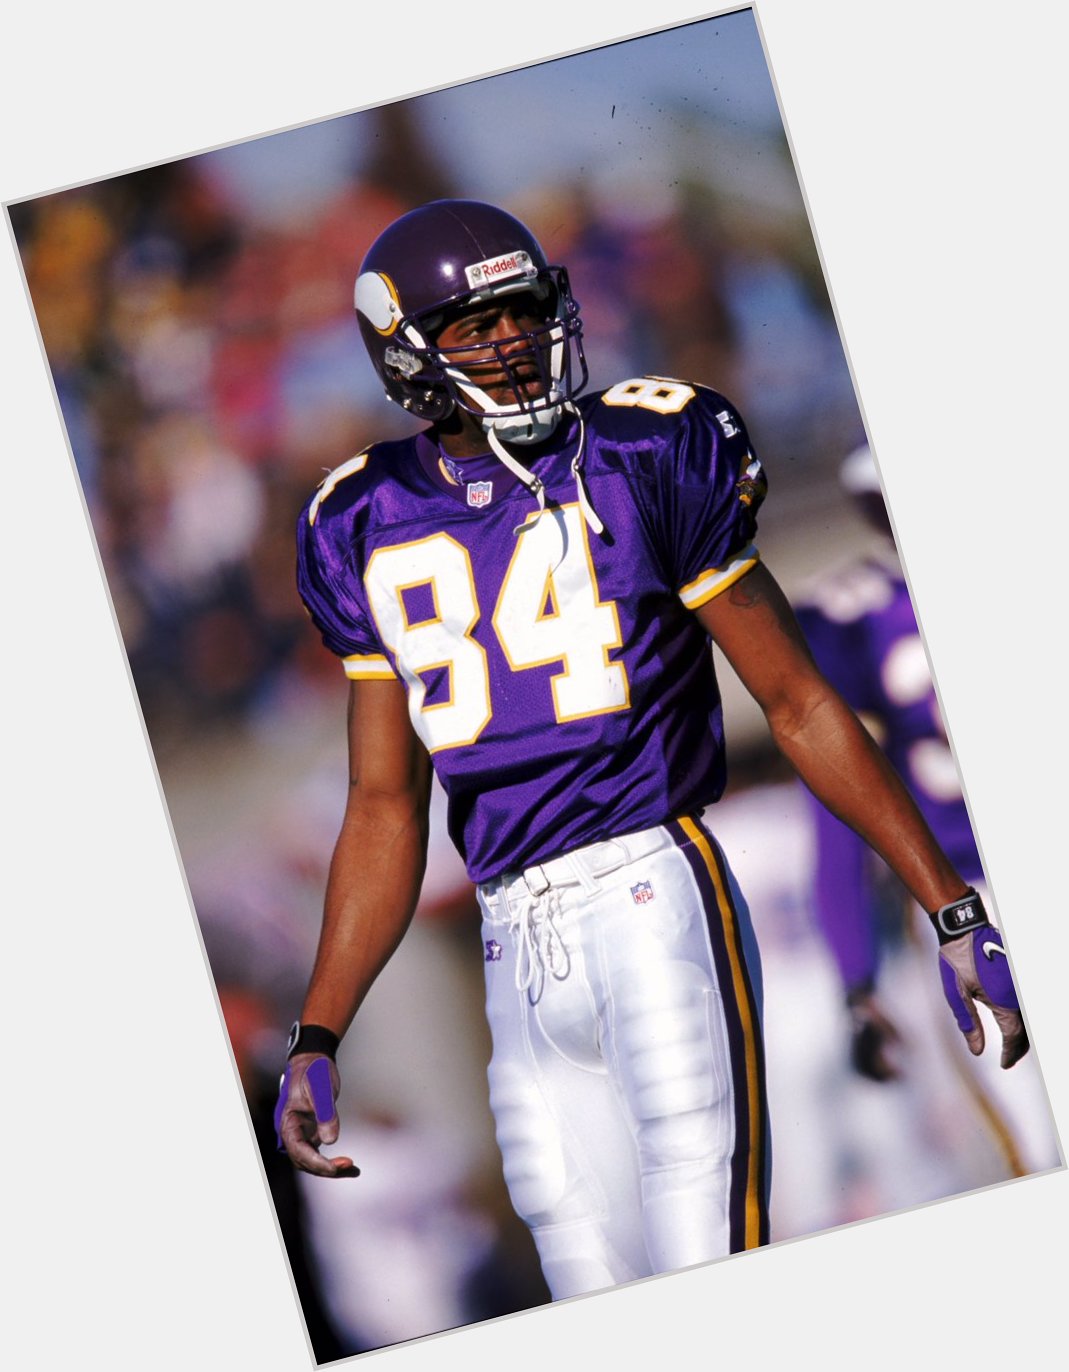 Special happy birthday to Randy Moss today  